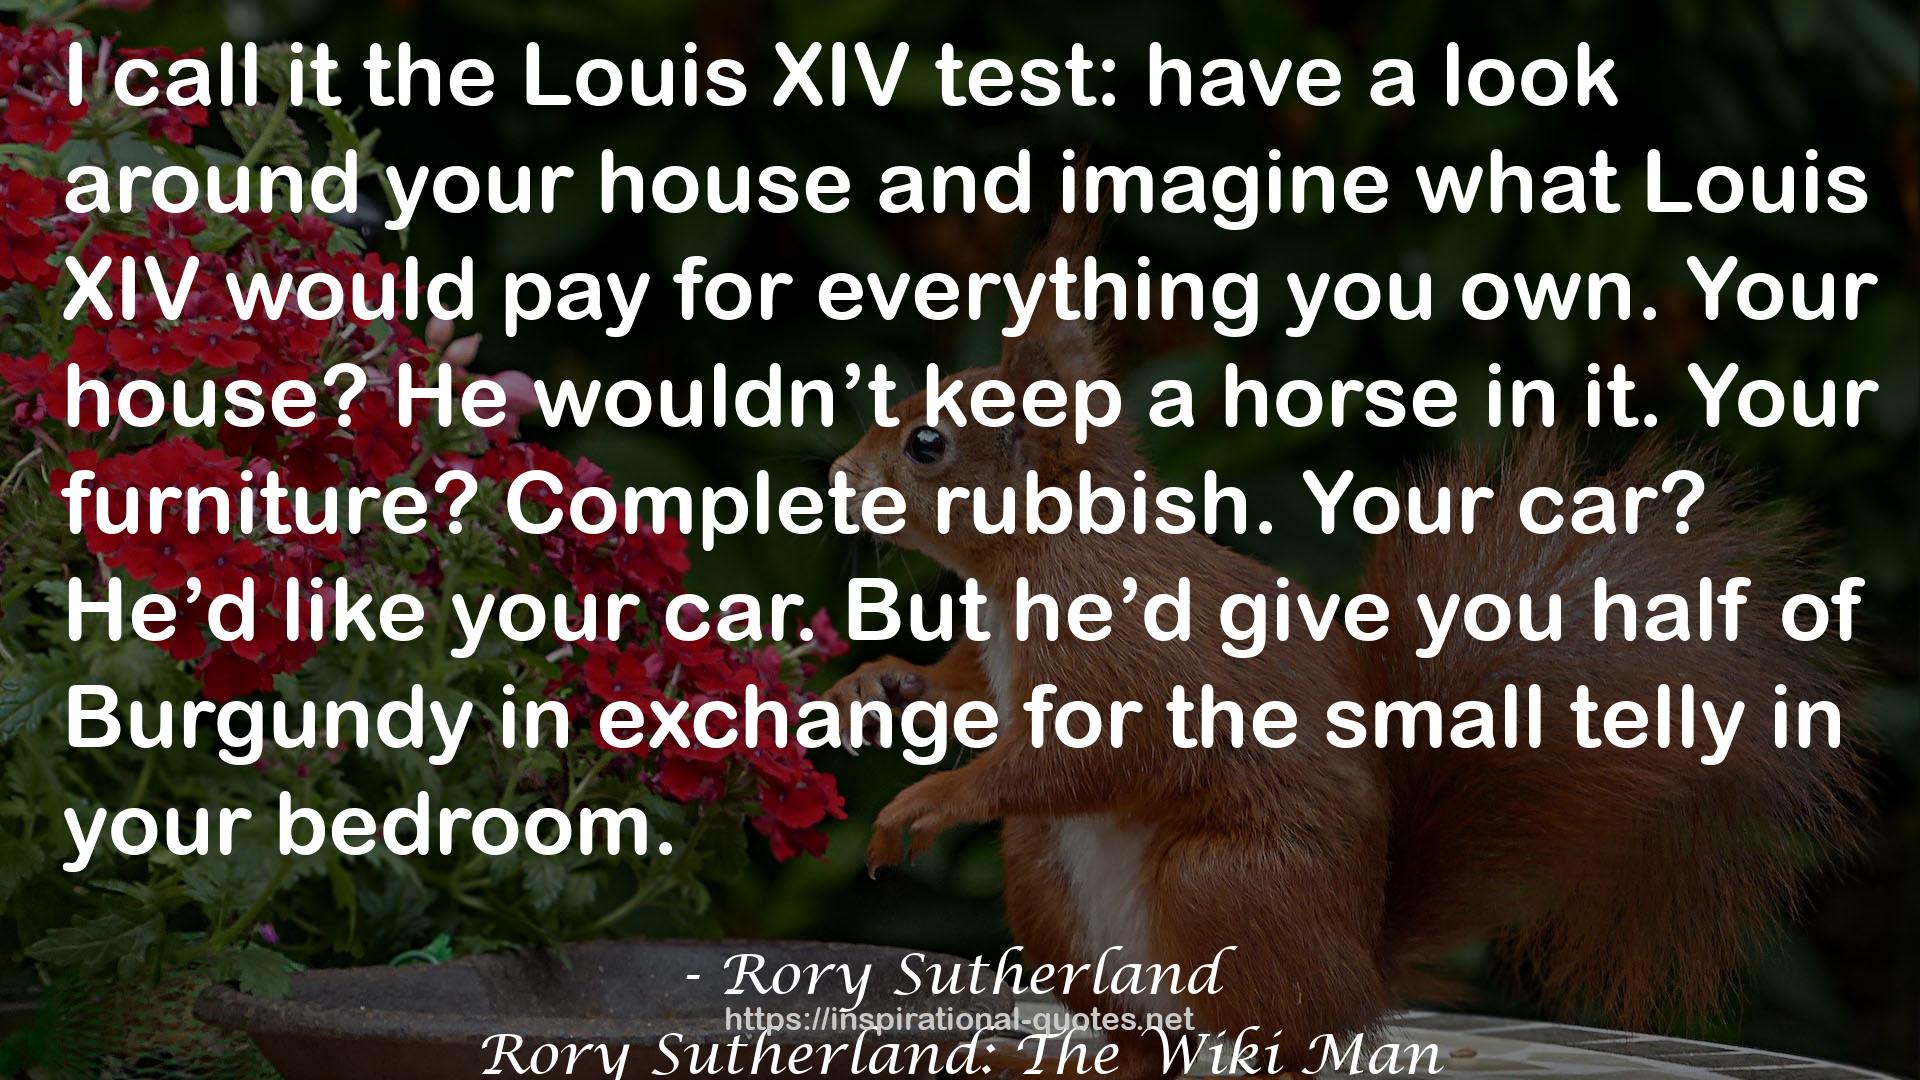 Rory Sutherland: The Wiki Man QUOTES